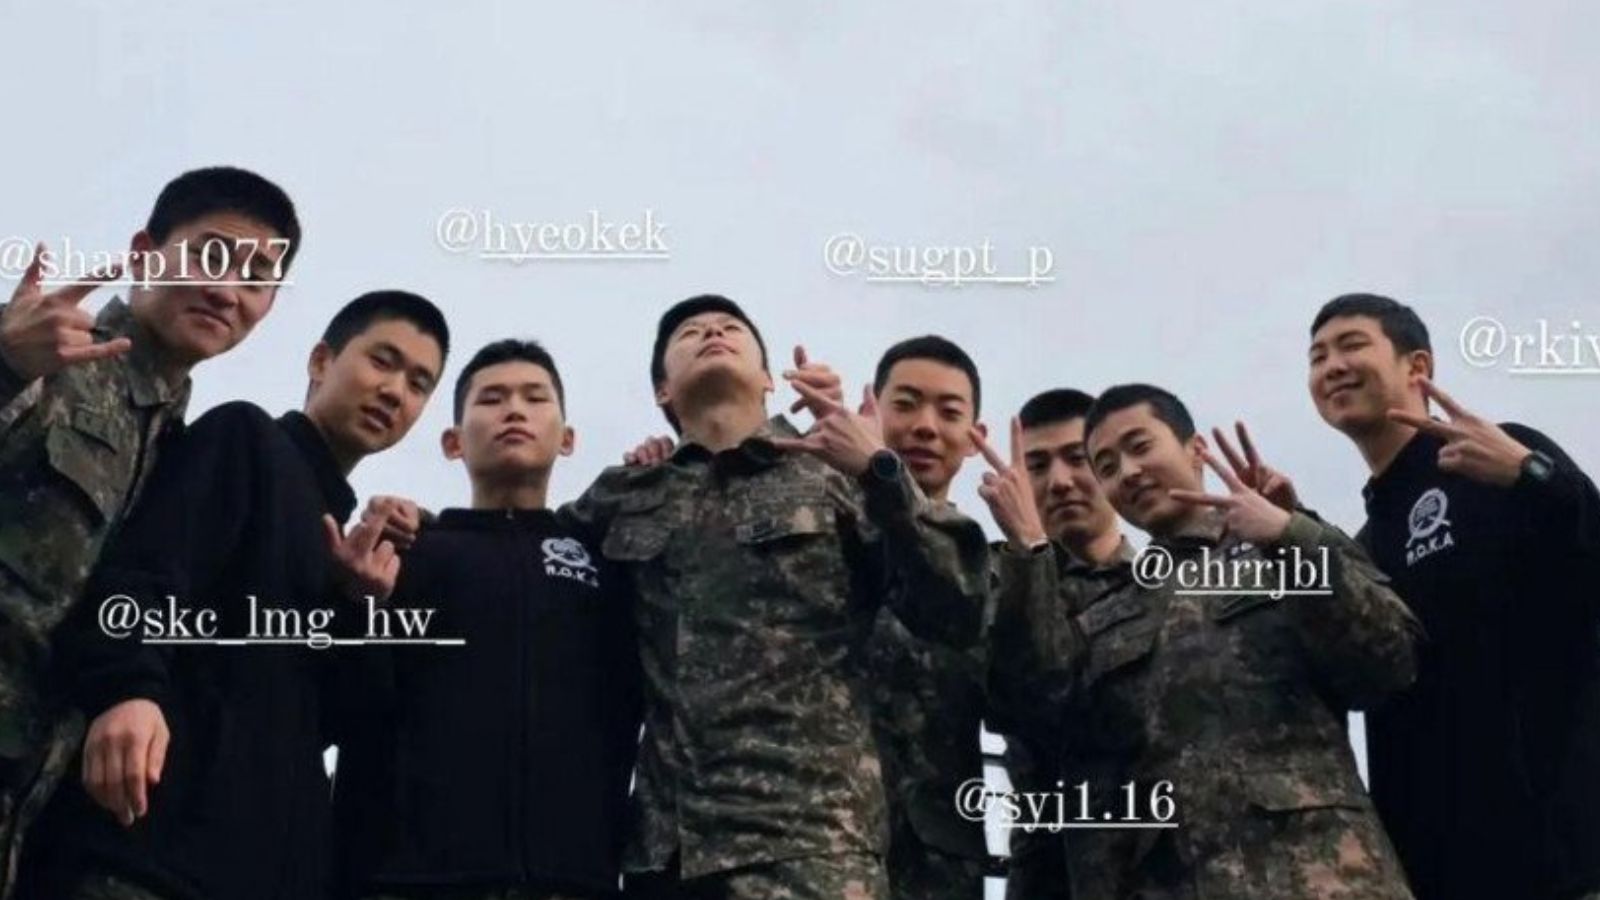 BTS’ RM shares latest photo from military training, archives all posts from second handle | Music News